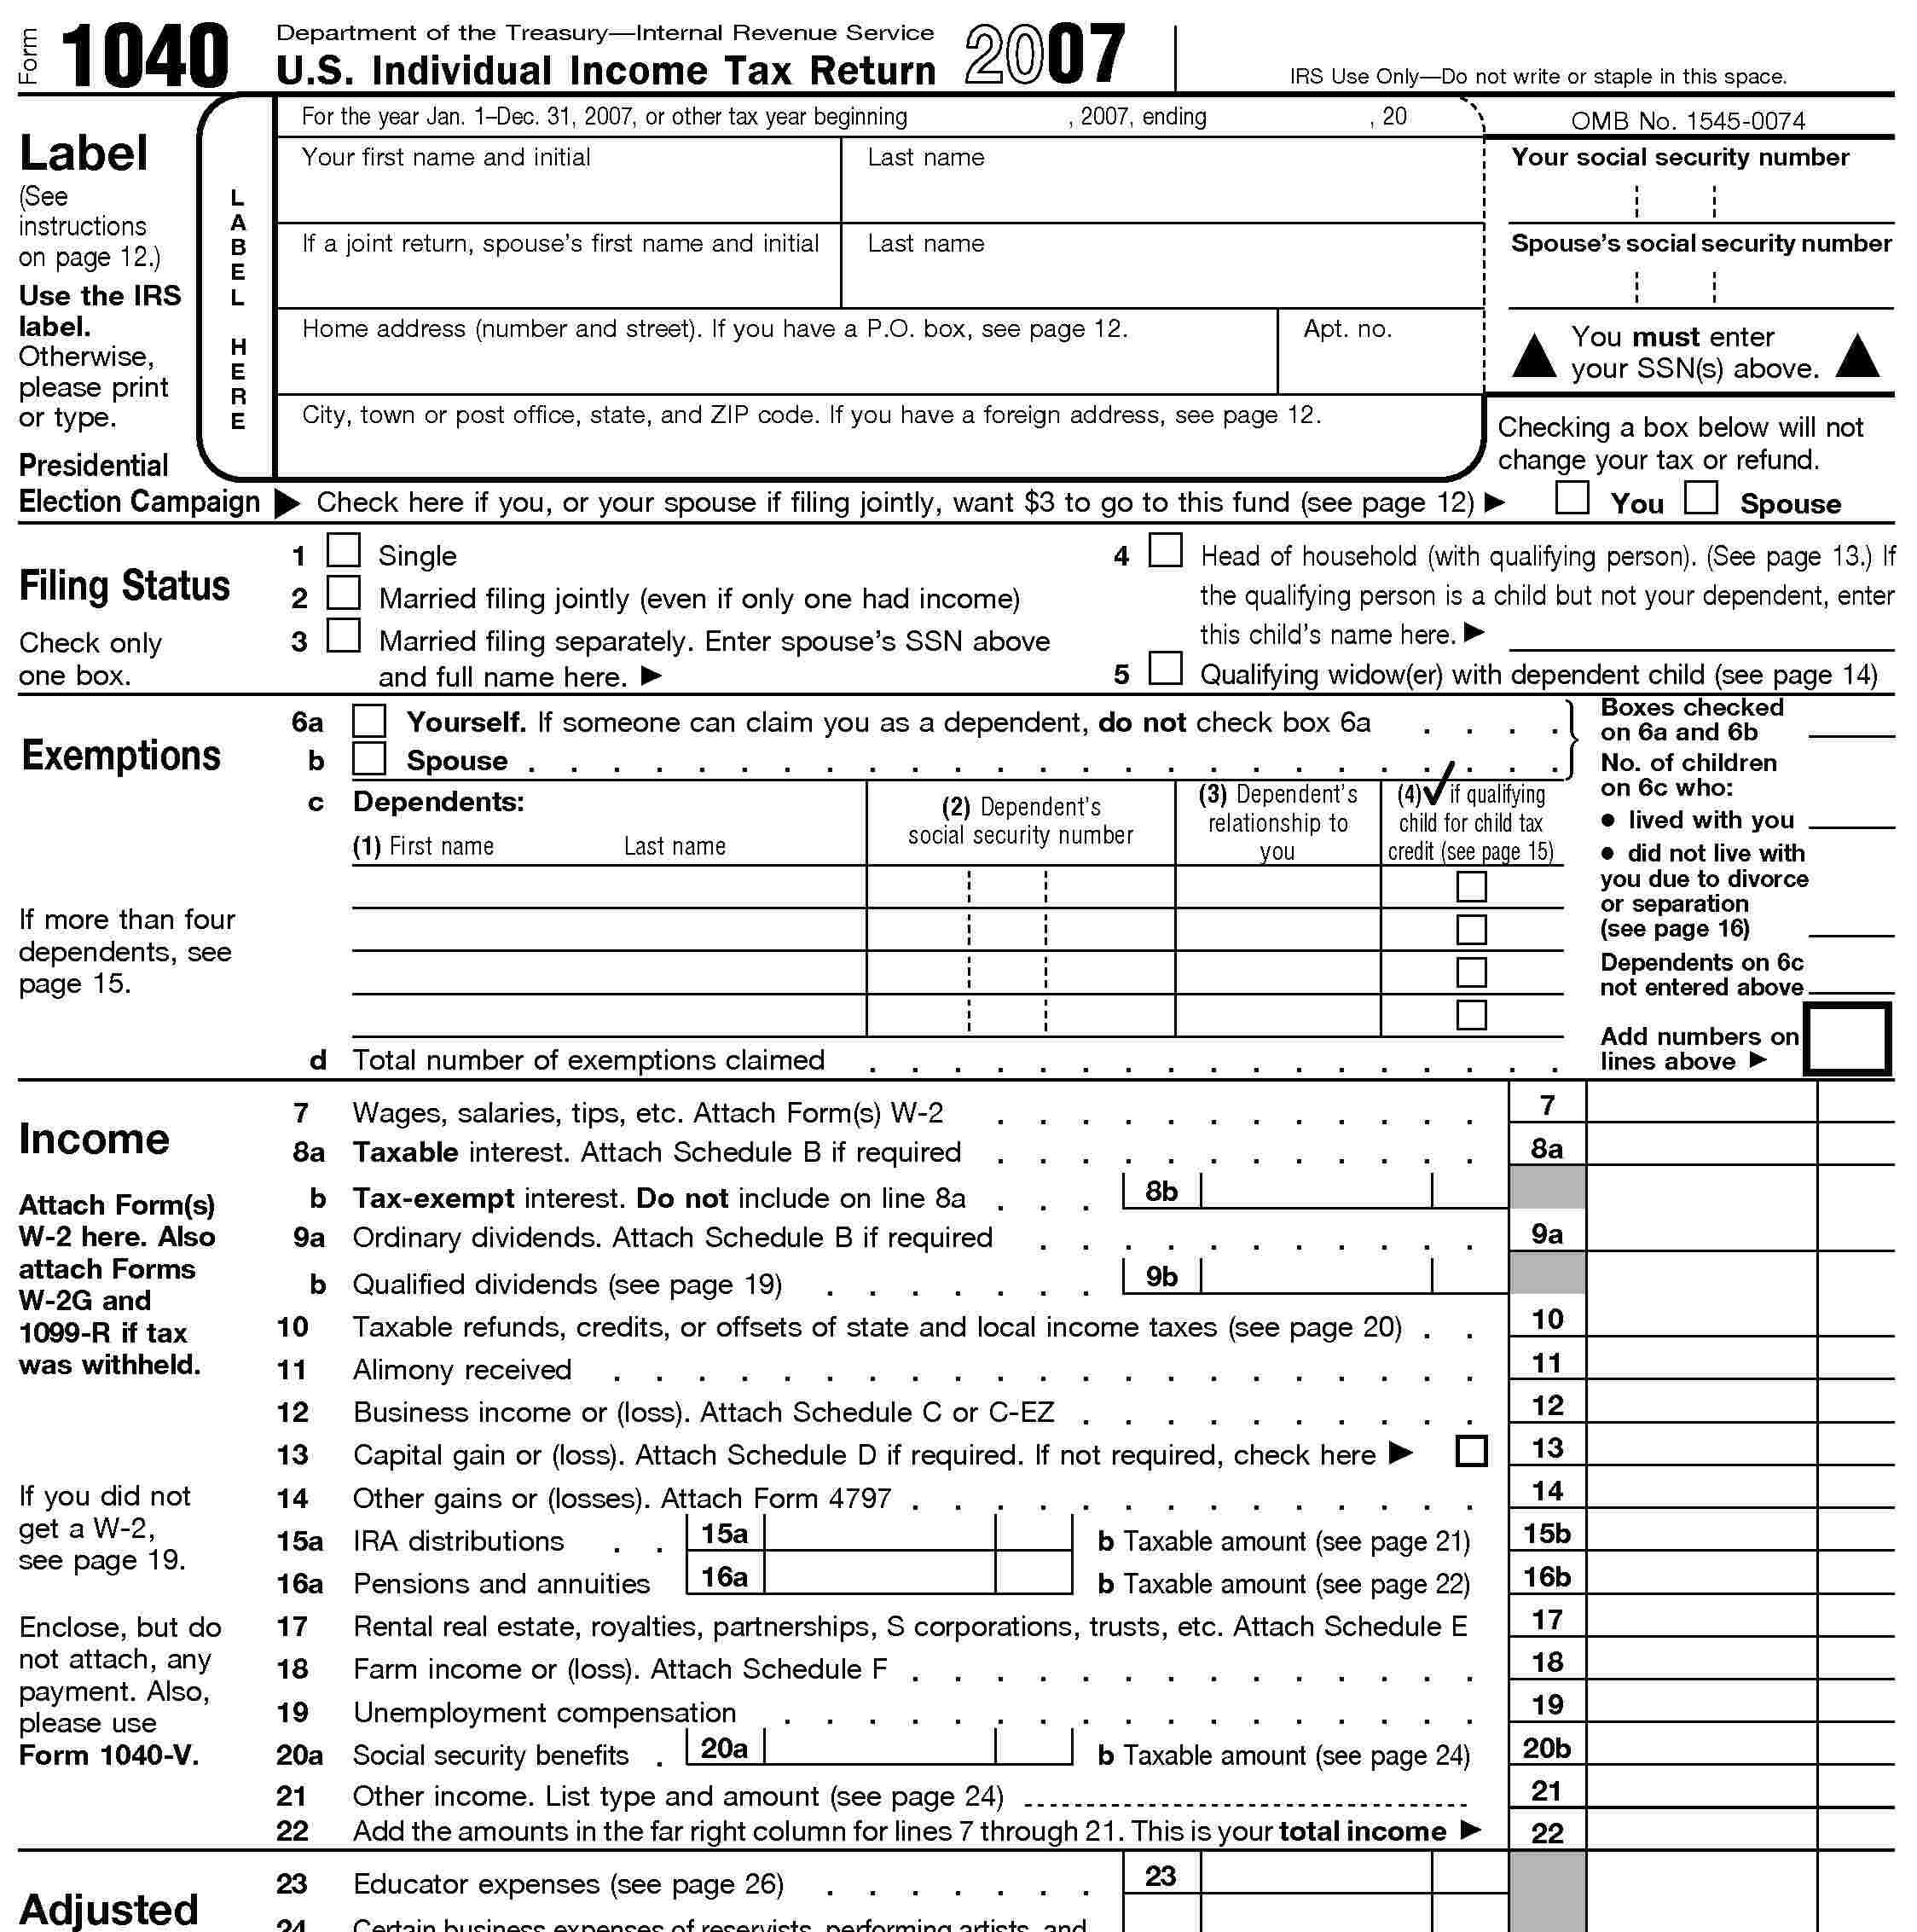 Where can you find 1040 printable tax forms?